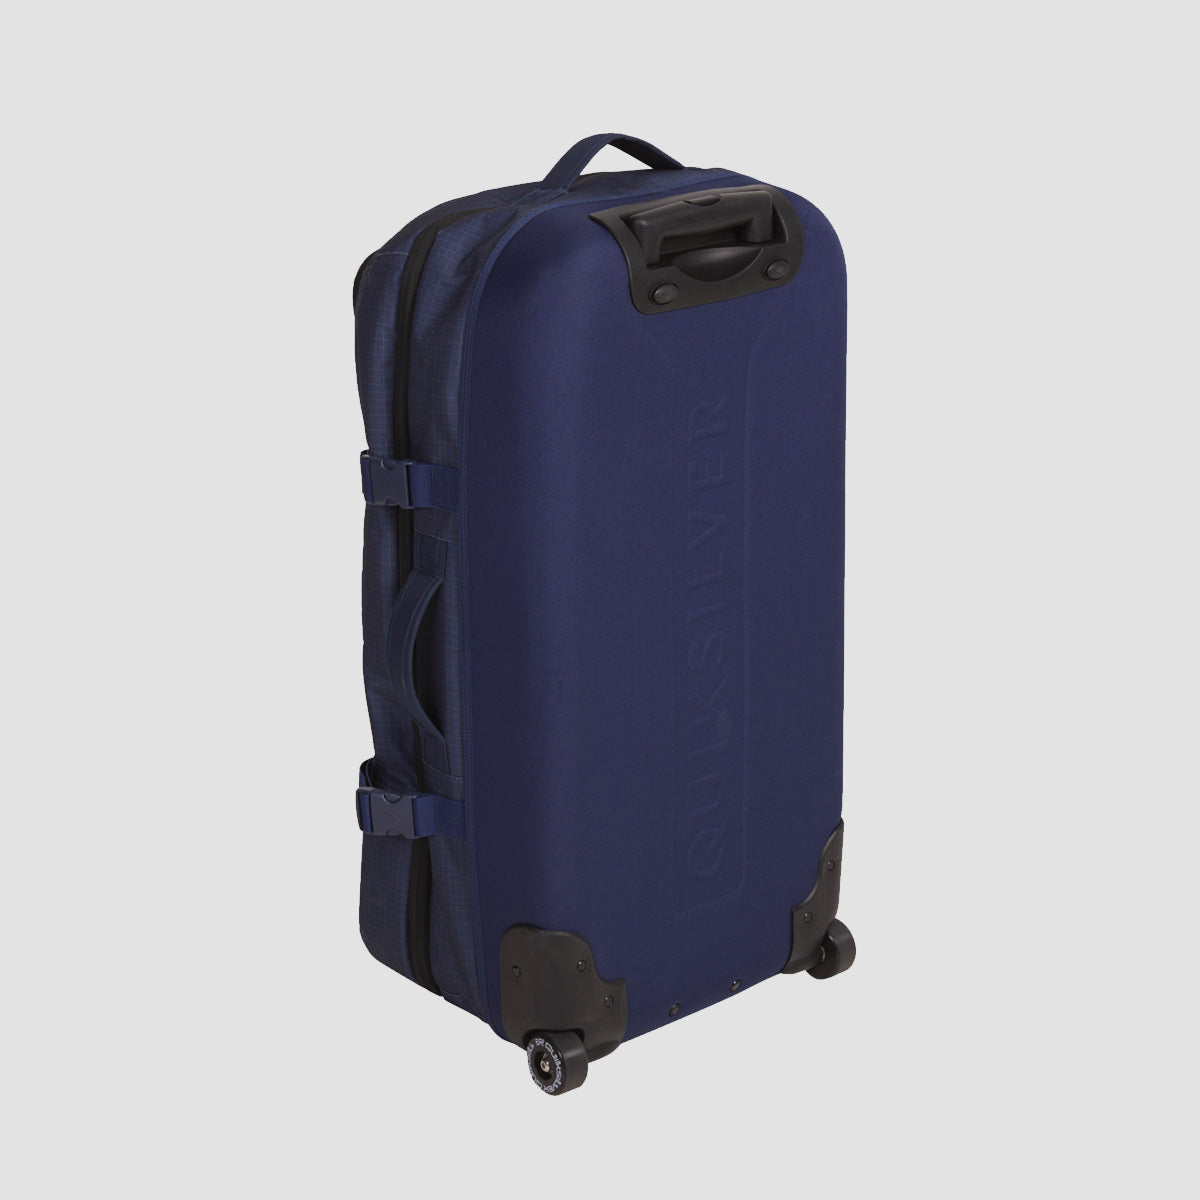 Quiksilver New Reach 100L Wheeled Suitcase Naval Academy